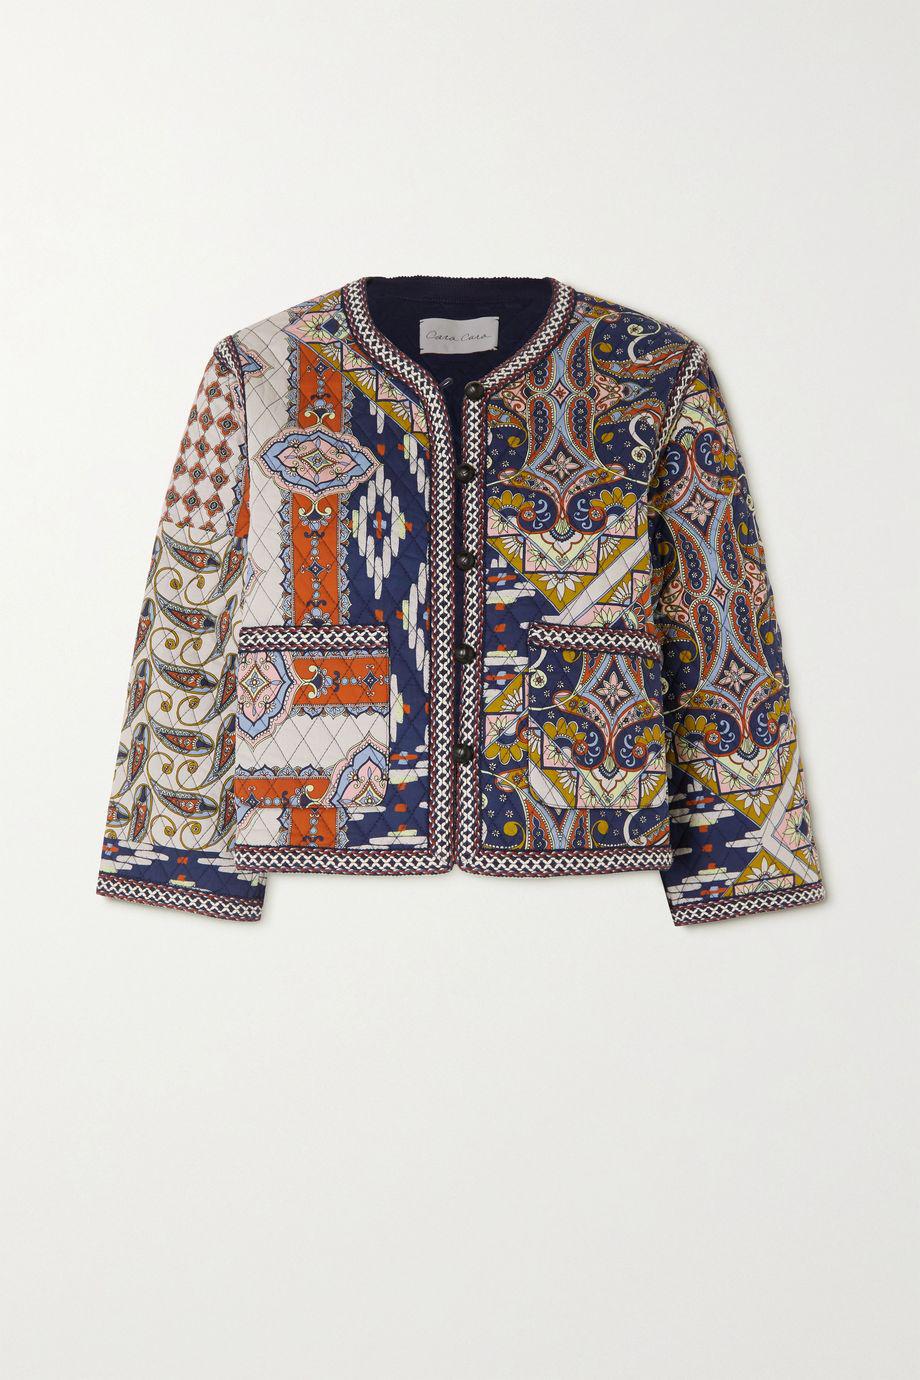 Marissa cropped quilted printed cotton-poplin jacket by CARA CARA